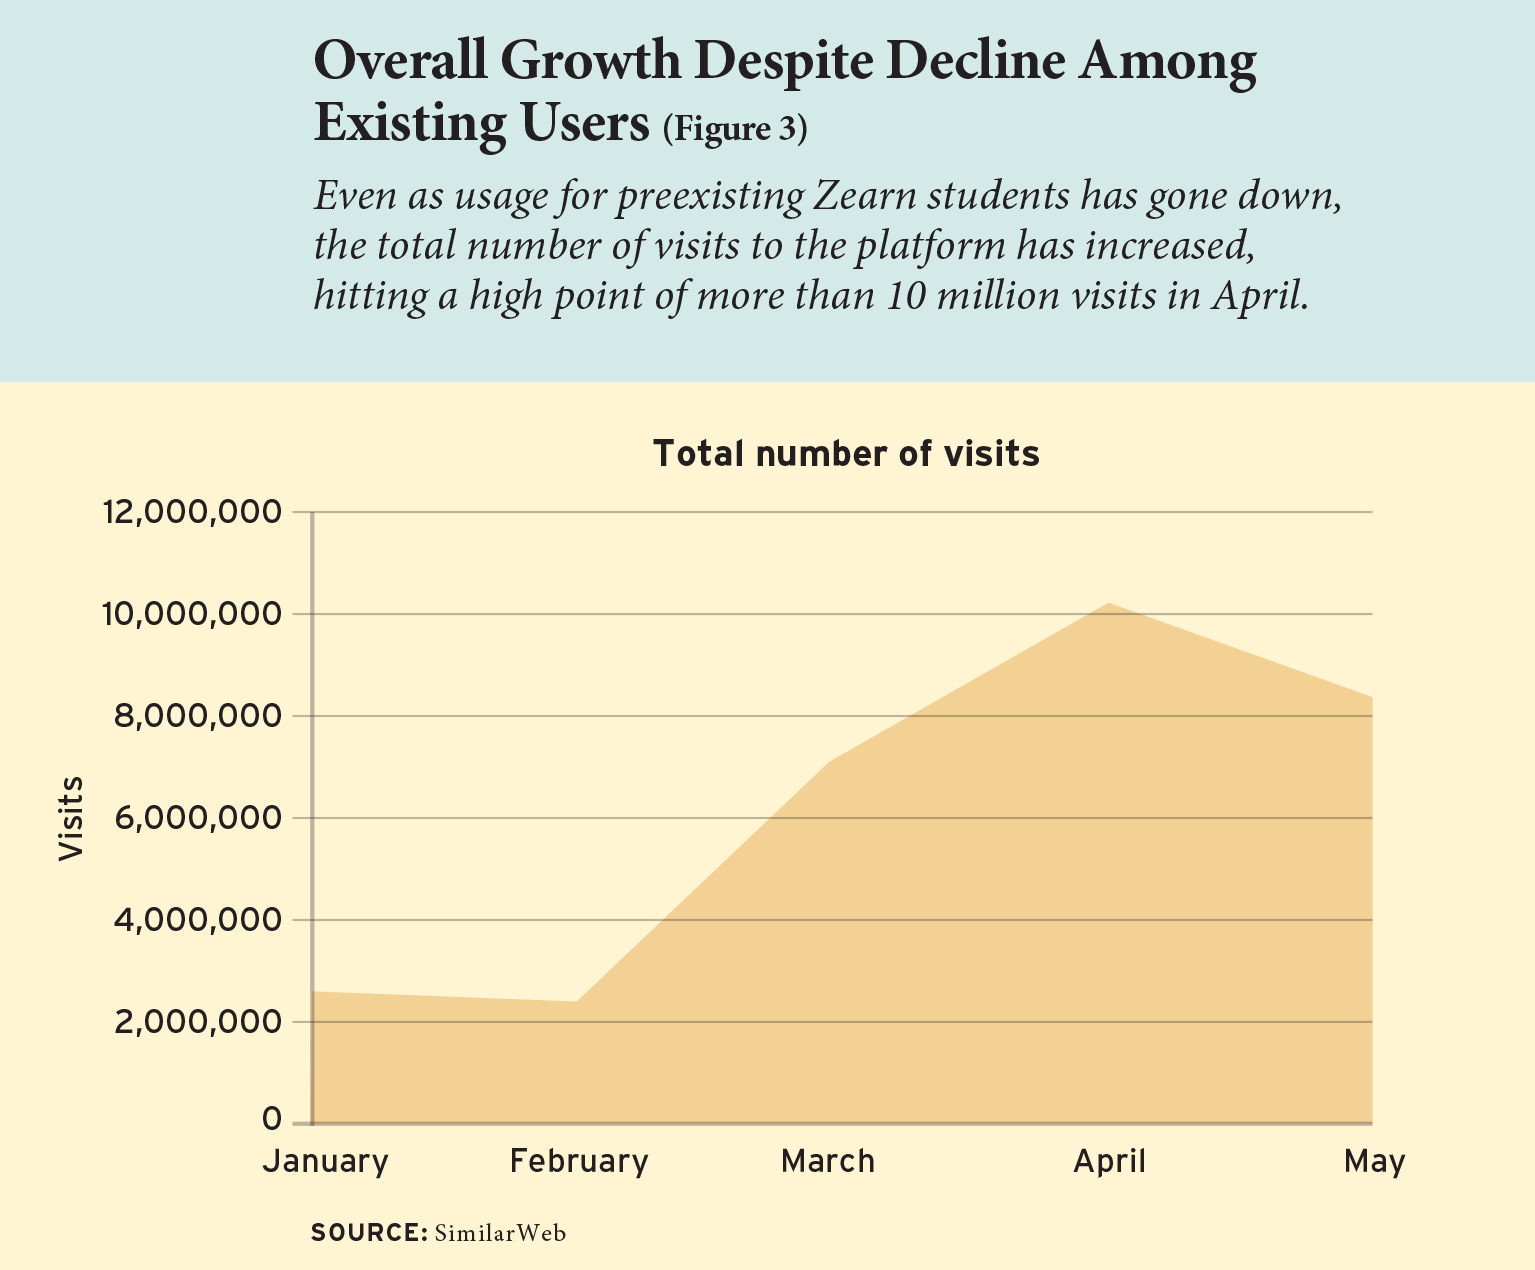 Figure 3: Overall Growth Despite Decline Among Existing Users